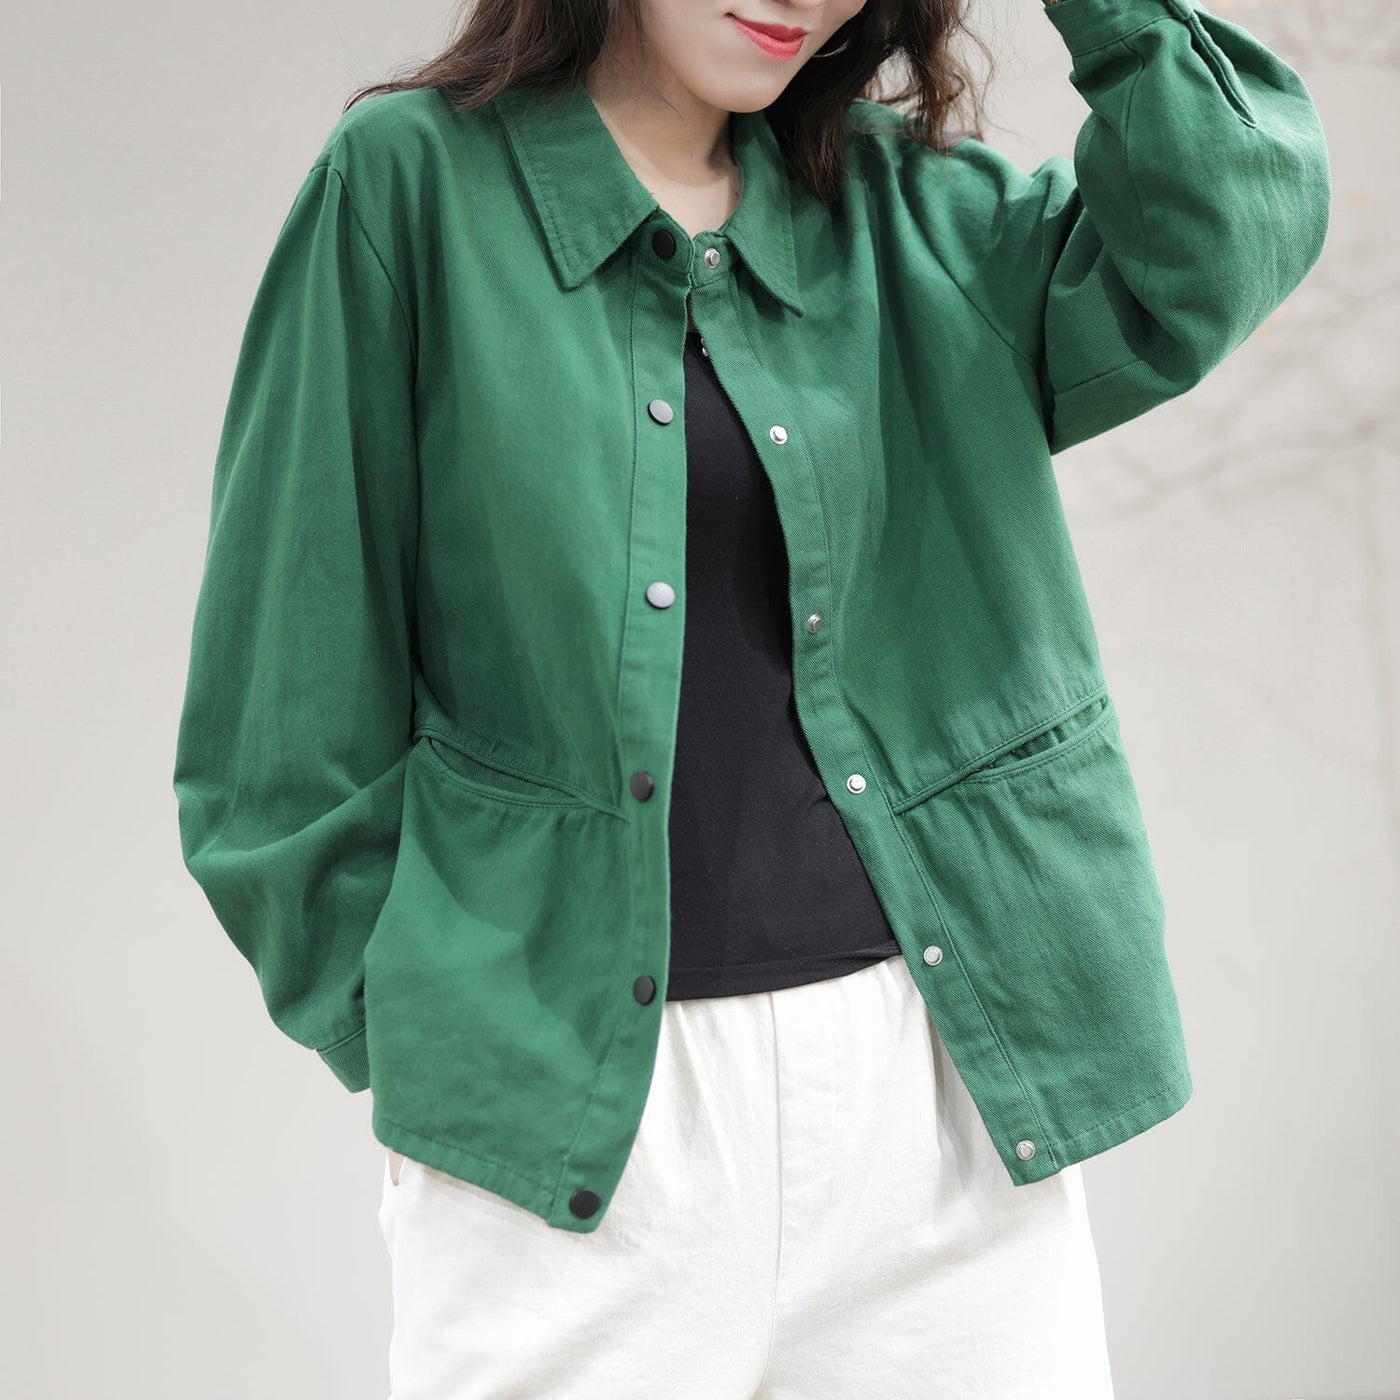 Women Spring Casual Loose Solid Cotton Jacket